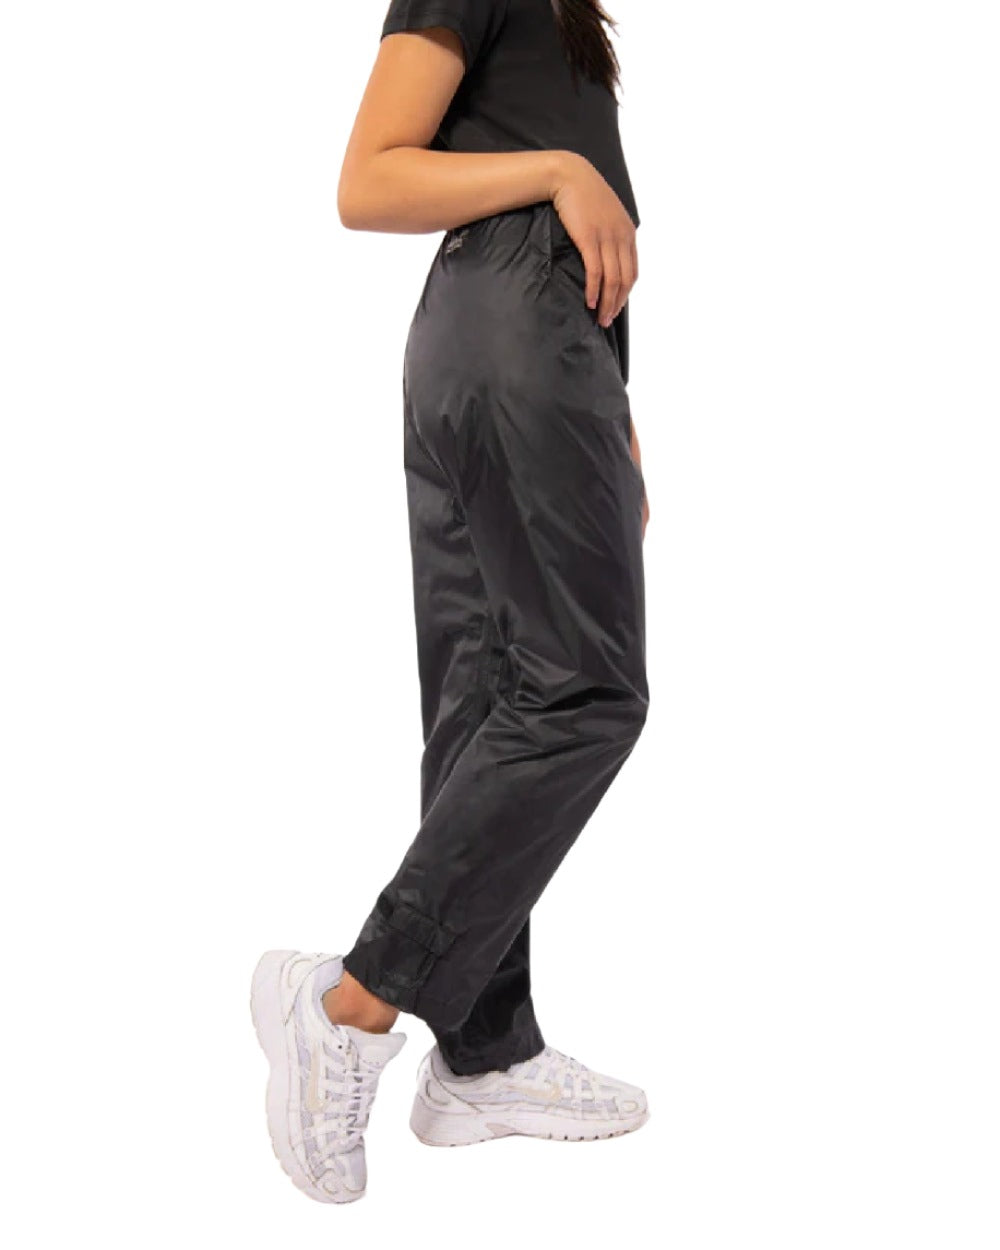 Black coloured Mac In A Sac Origin 2 Childrens Overtrousers on white background 